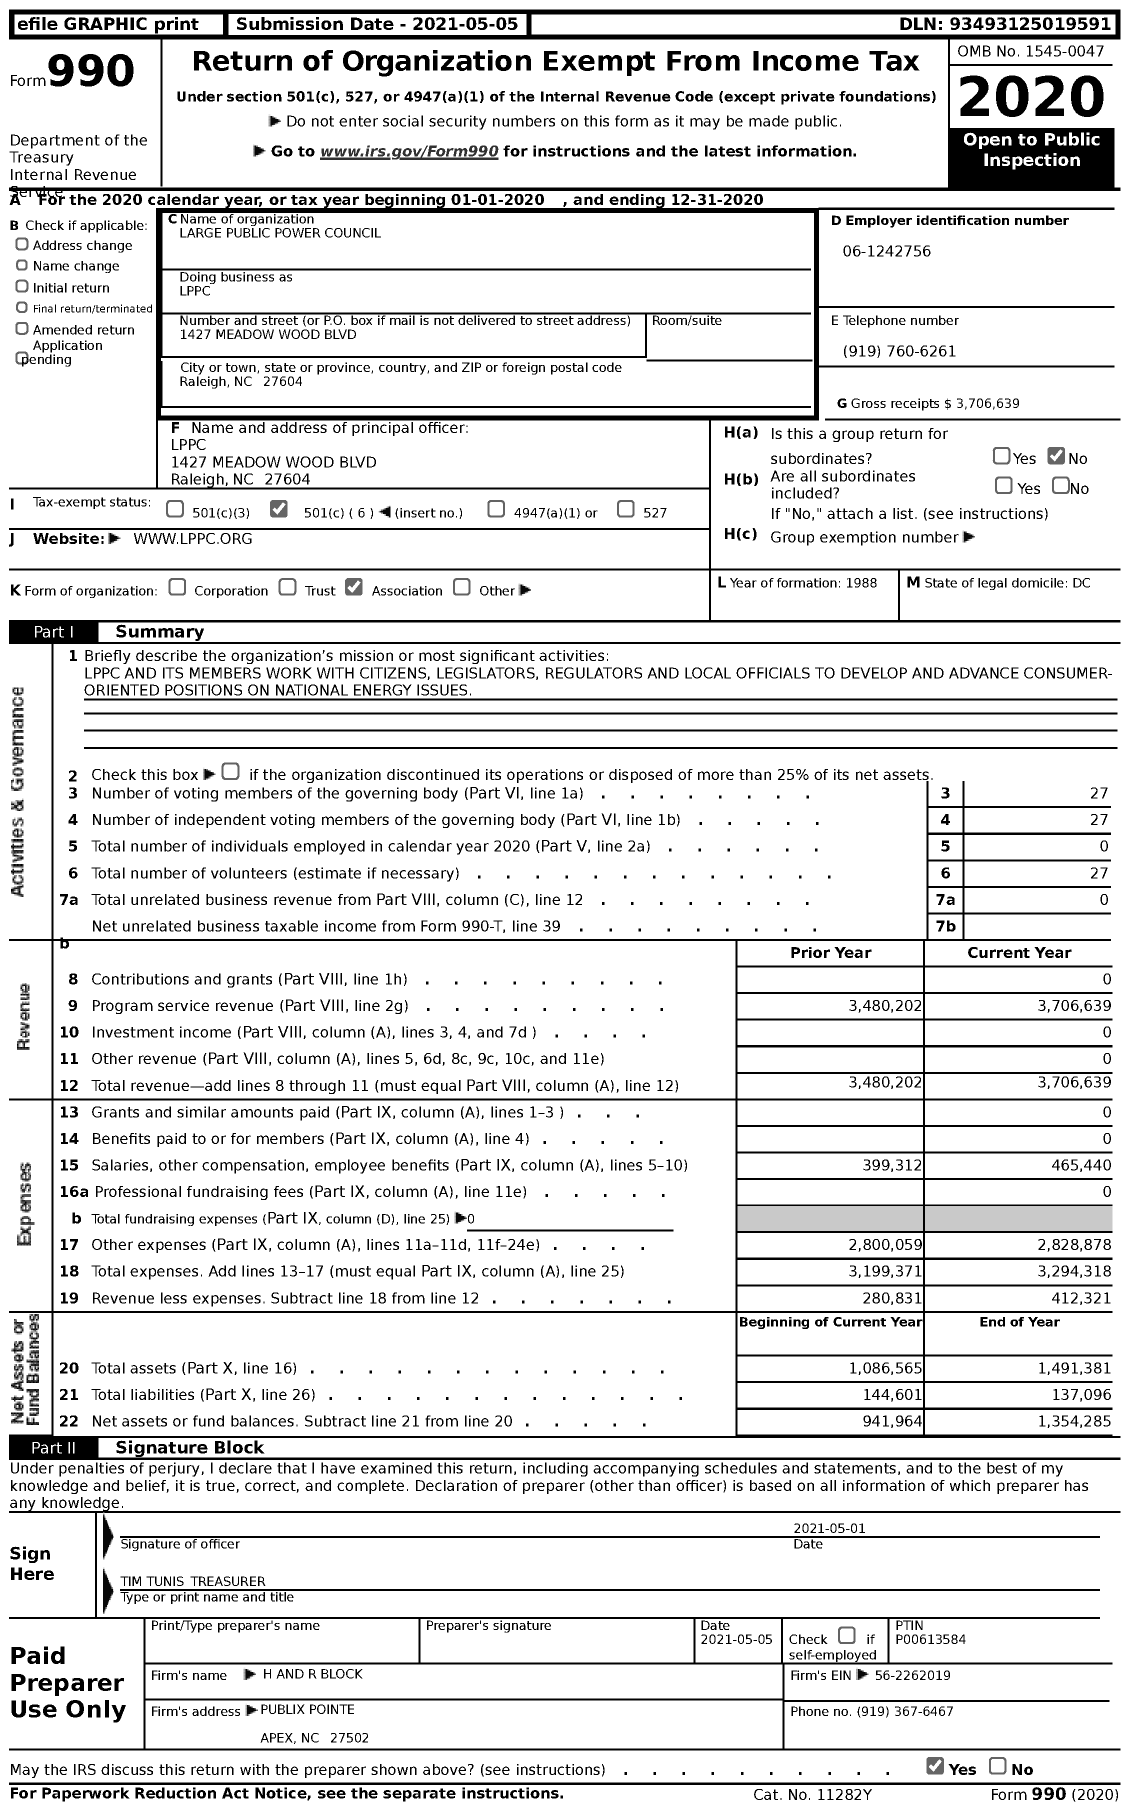 Image of first page of 2020 Form 990 for Large Public Power Counsel (LPPC)